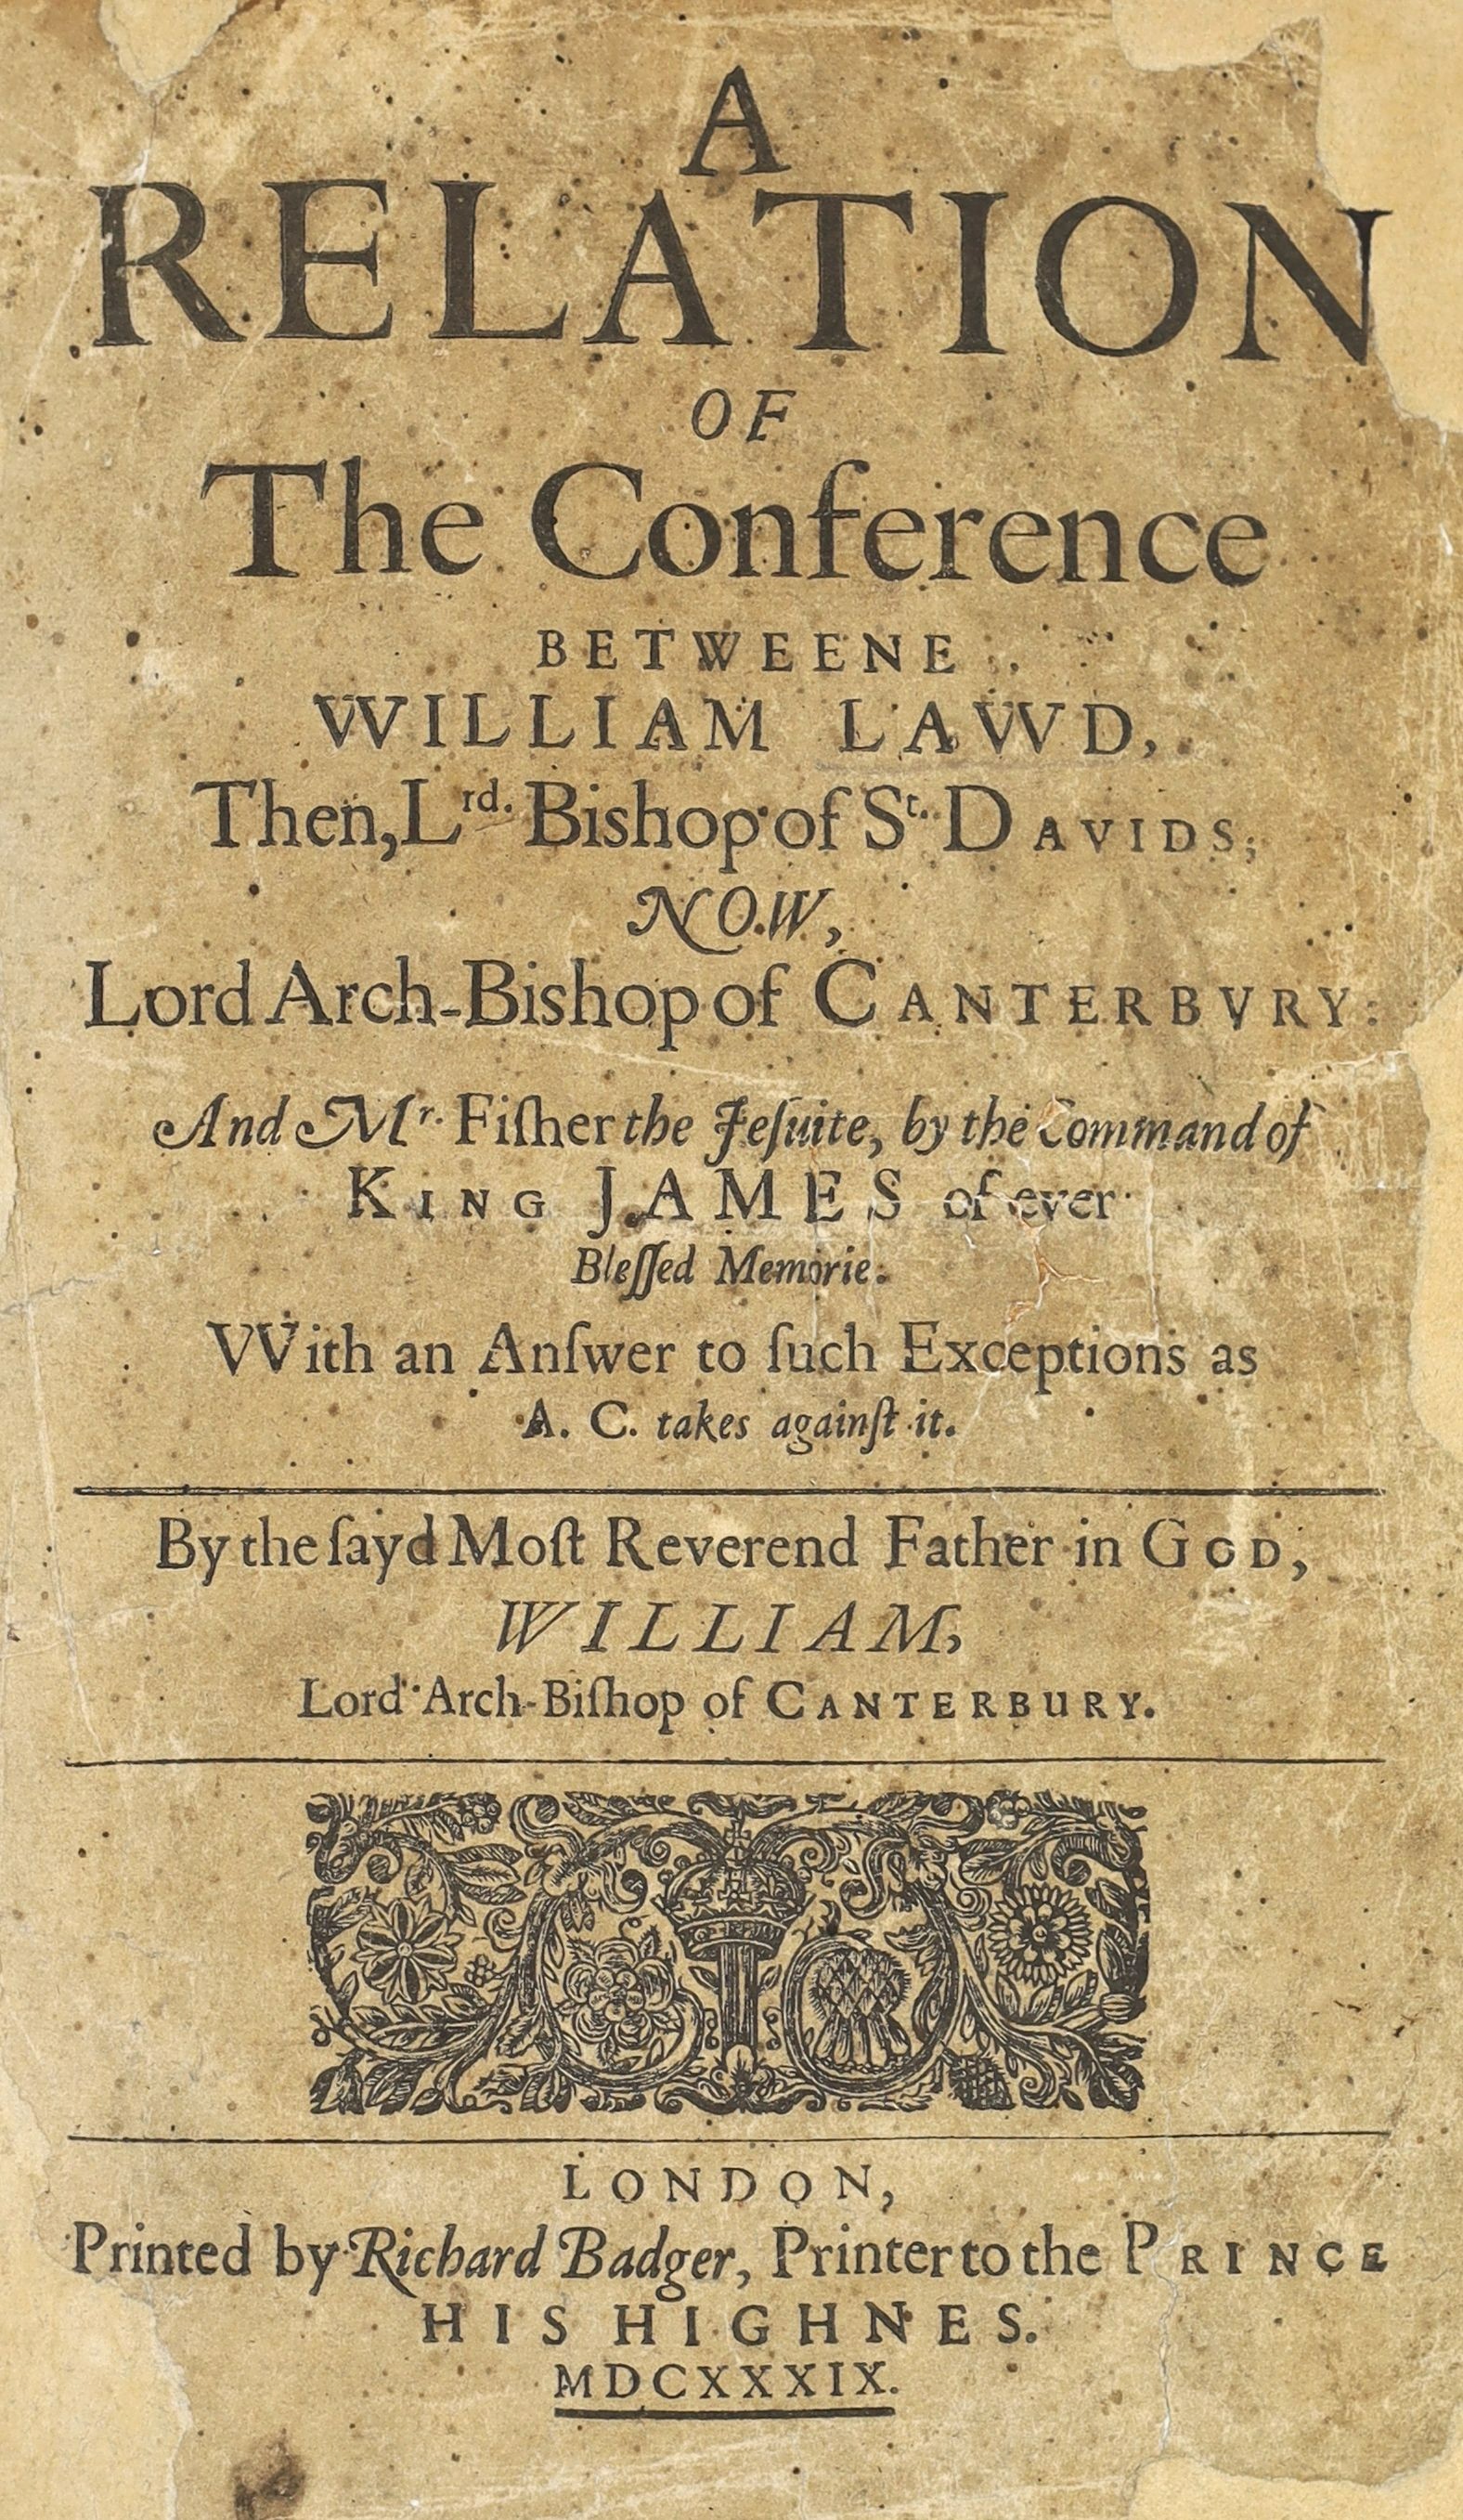 Laud, William - A Relation of the Conference betweene William Law, then Lrd. Bishop of St. Davids… and Mr. Fisher the Jesuite, 1st edition, title refurbished and laid down (with partial loss to a few letters), browned ,